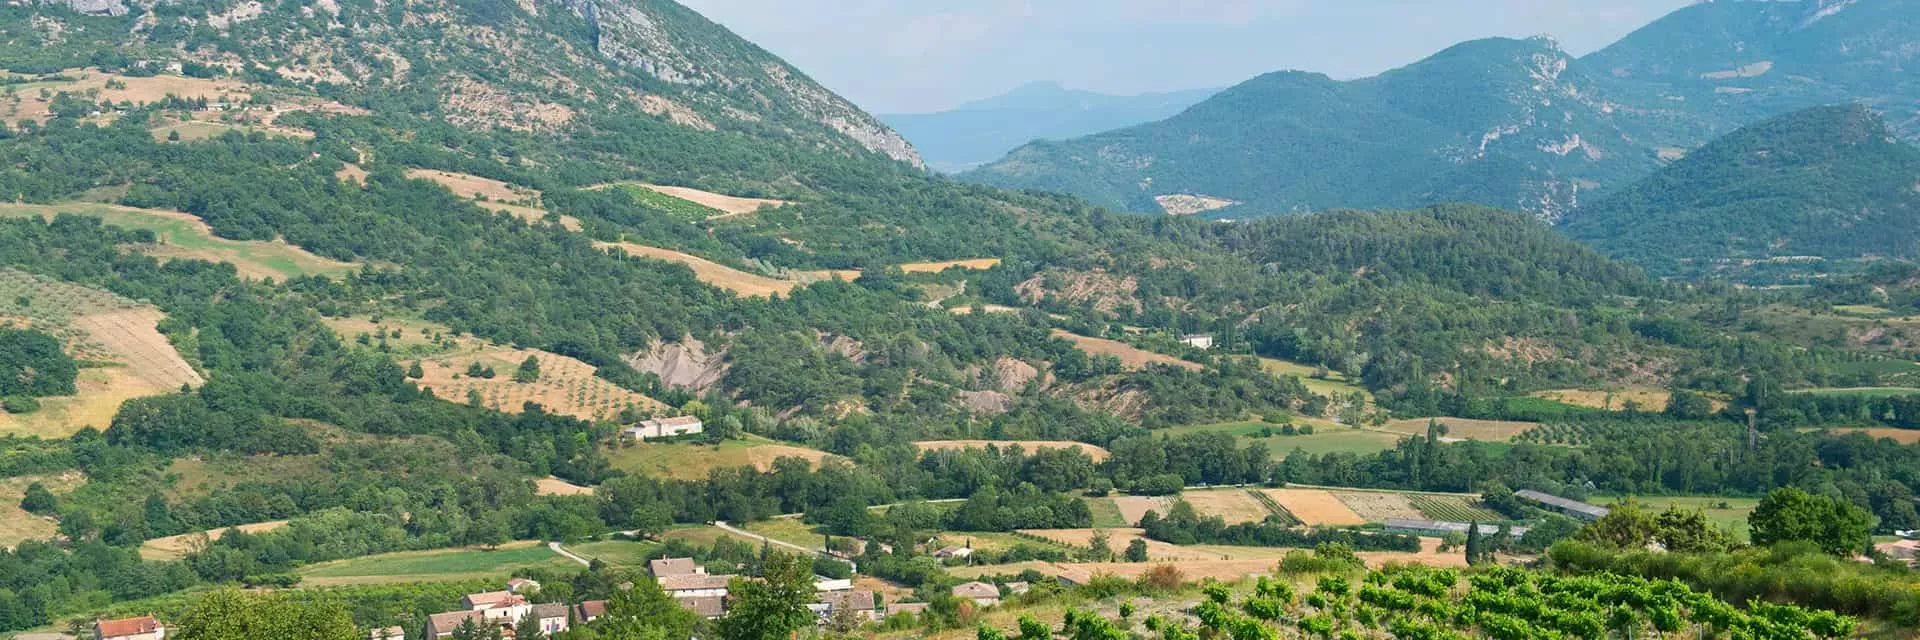 Holiday residence rental in Châteauneuf sur Isère